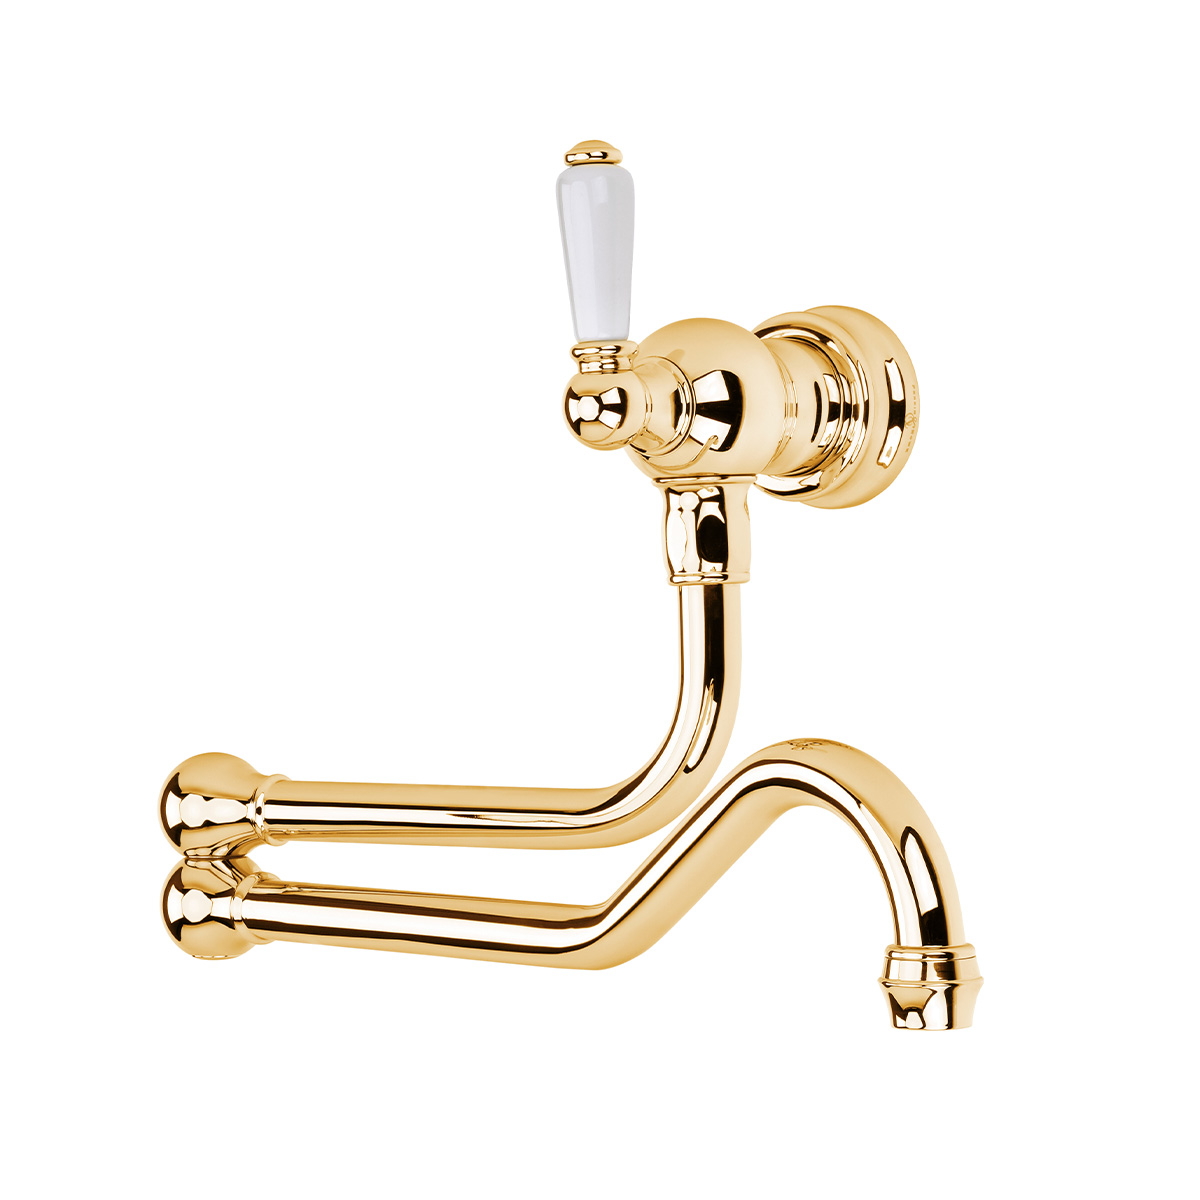 Shaws by Perrin & Rowe wall mounted pot filler in Polished Brass. Traditional style pot filler with single white porcelain handle - AUSH.4417. Distributed in Australia by Luxe by Design, Brisbane.